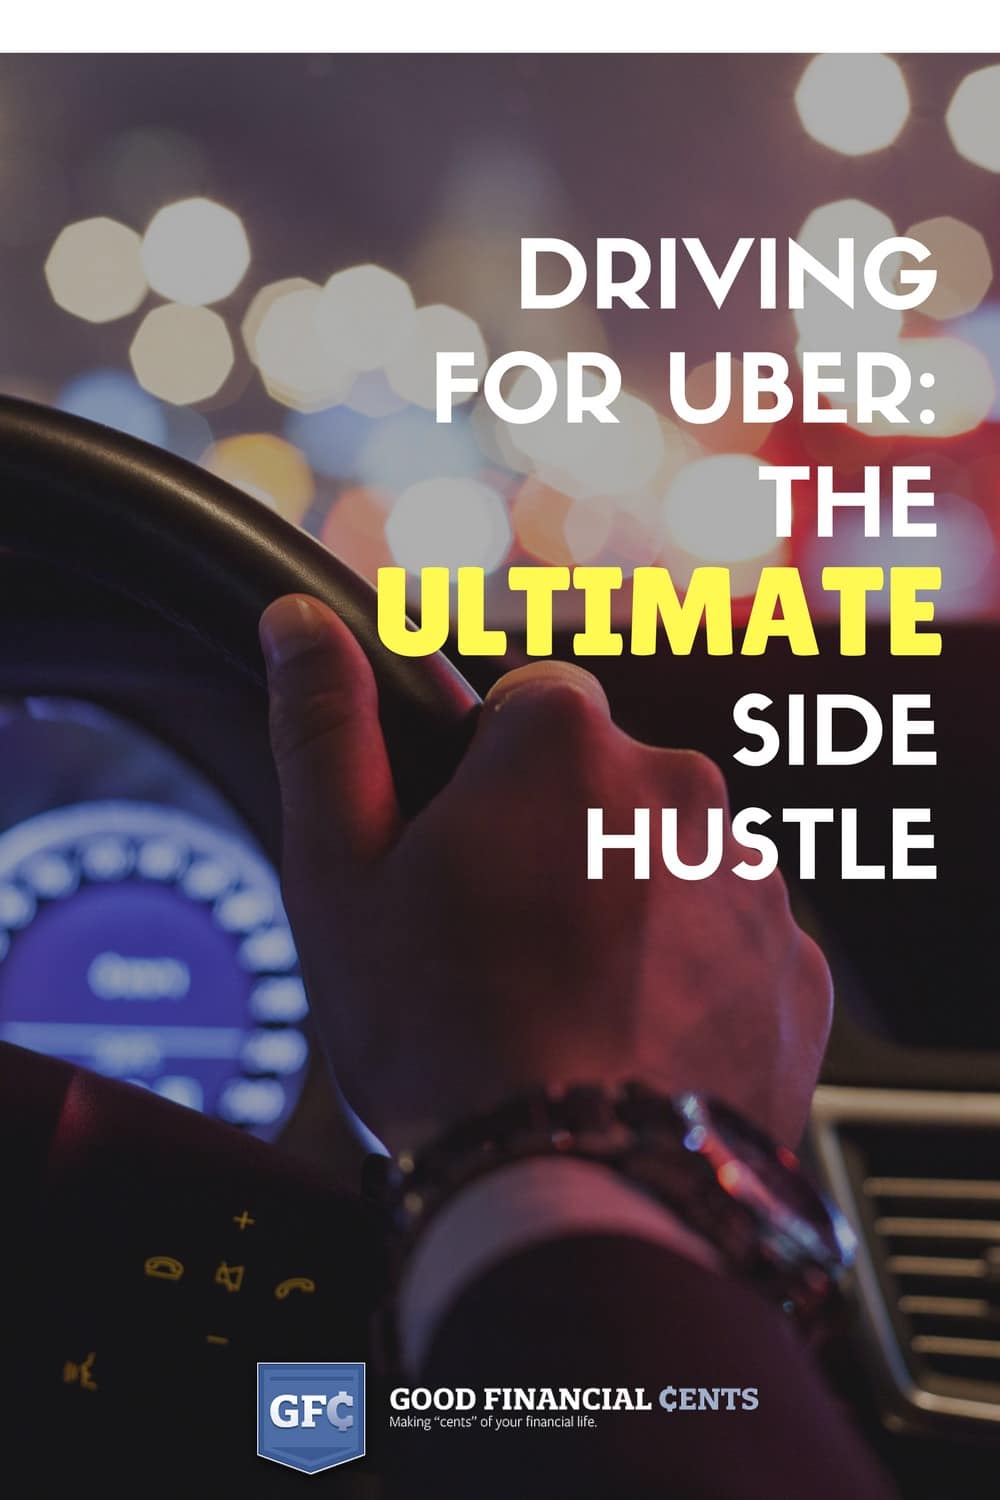 Driving for Uber can be a fun and rewards ing experience. Get more details about how to start this great side hustle.